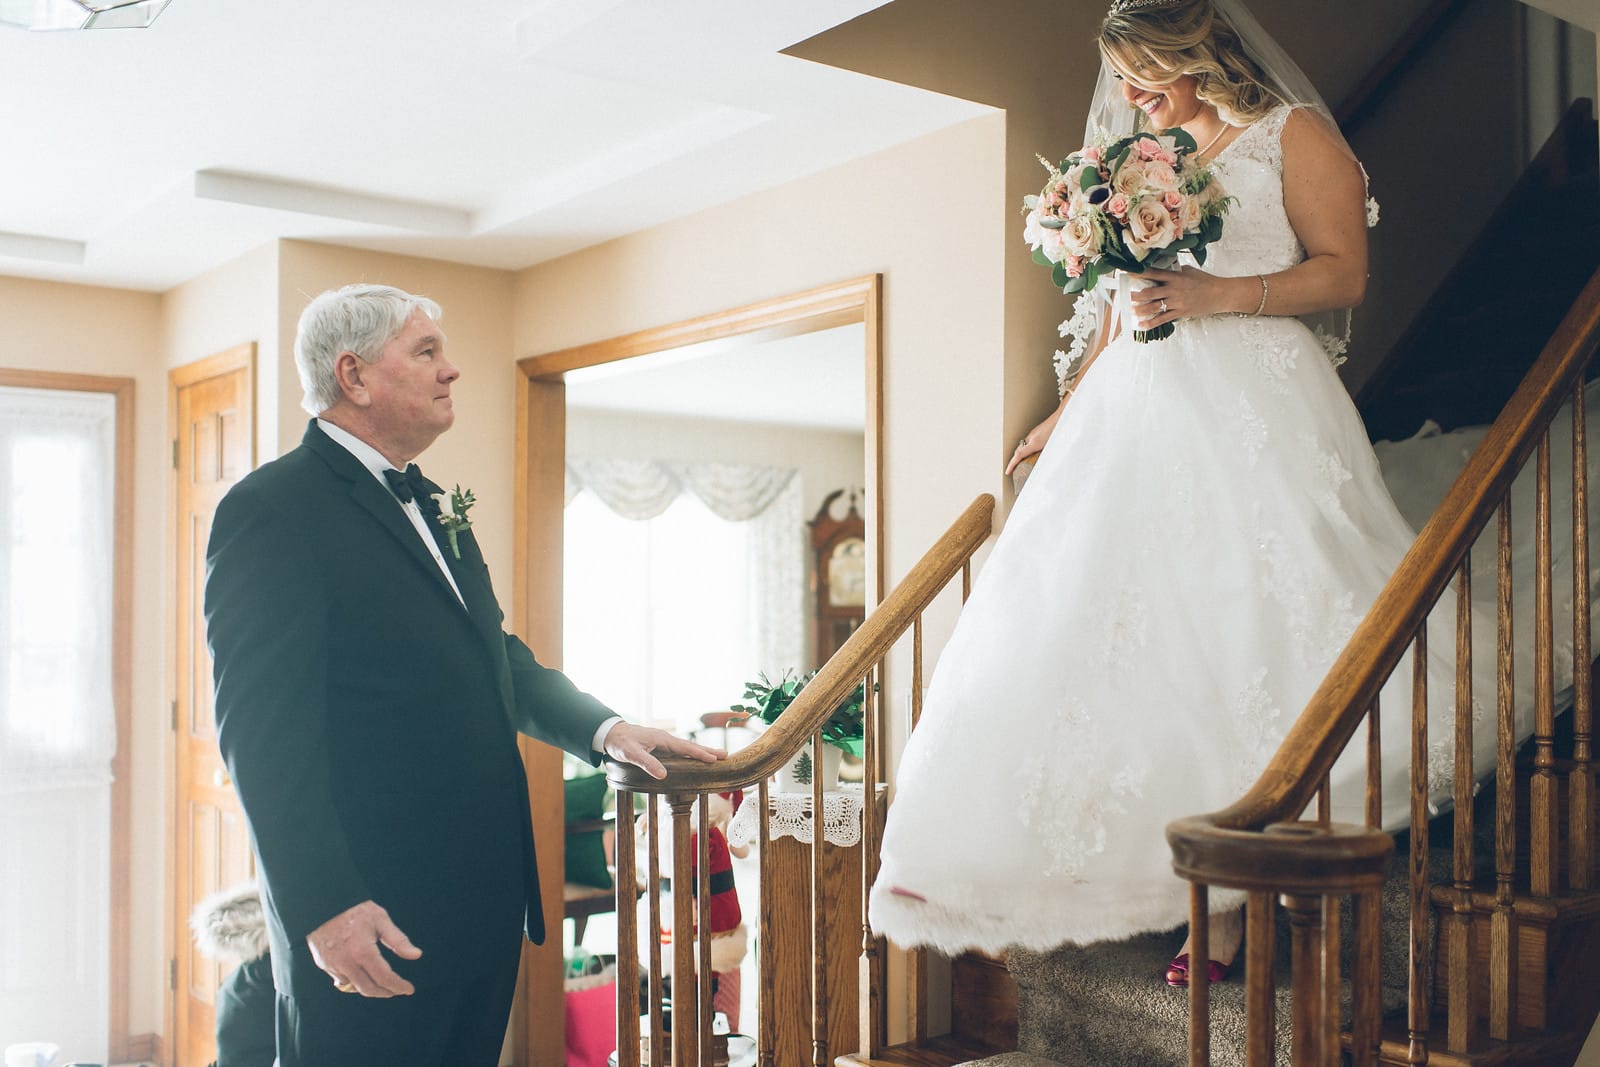 Understanding the Different Kinds of Wedding Photography - Moment-Driven Wedding Photojournalism by NJ Wedding Photographer Ben Lau.